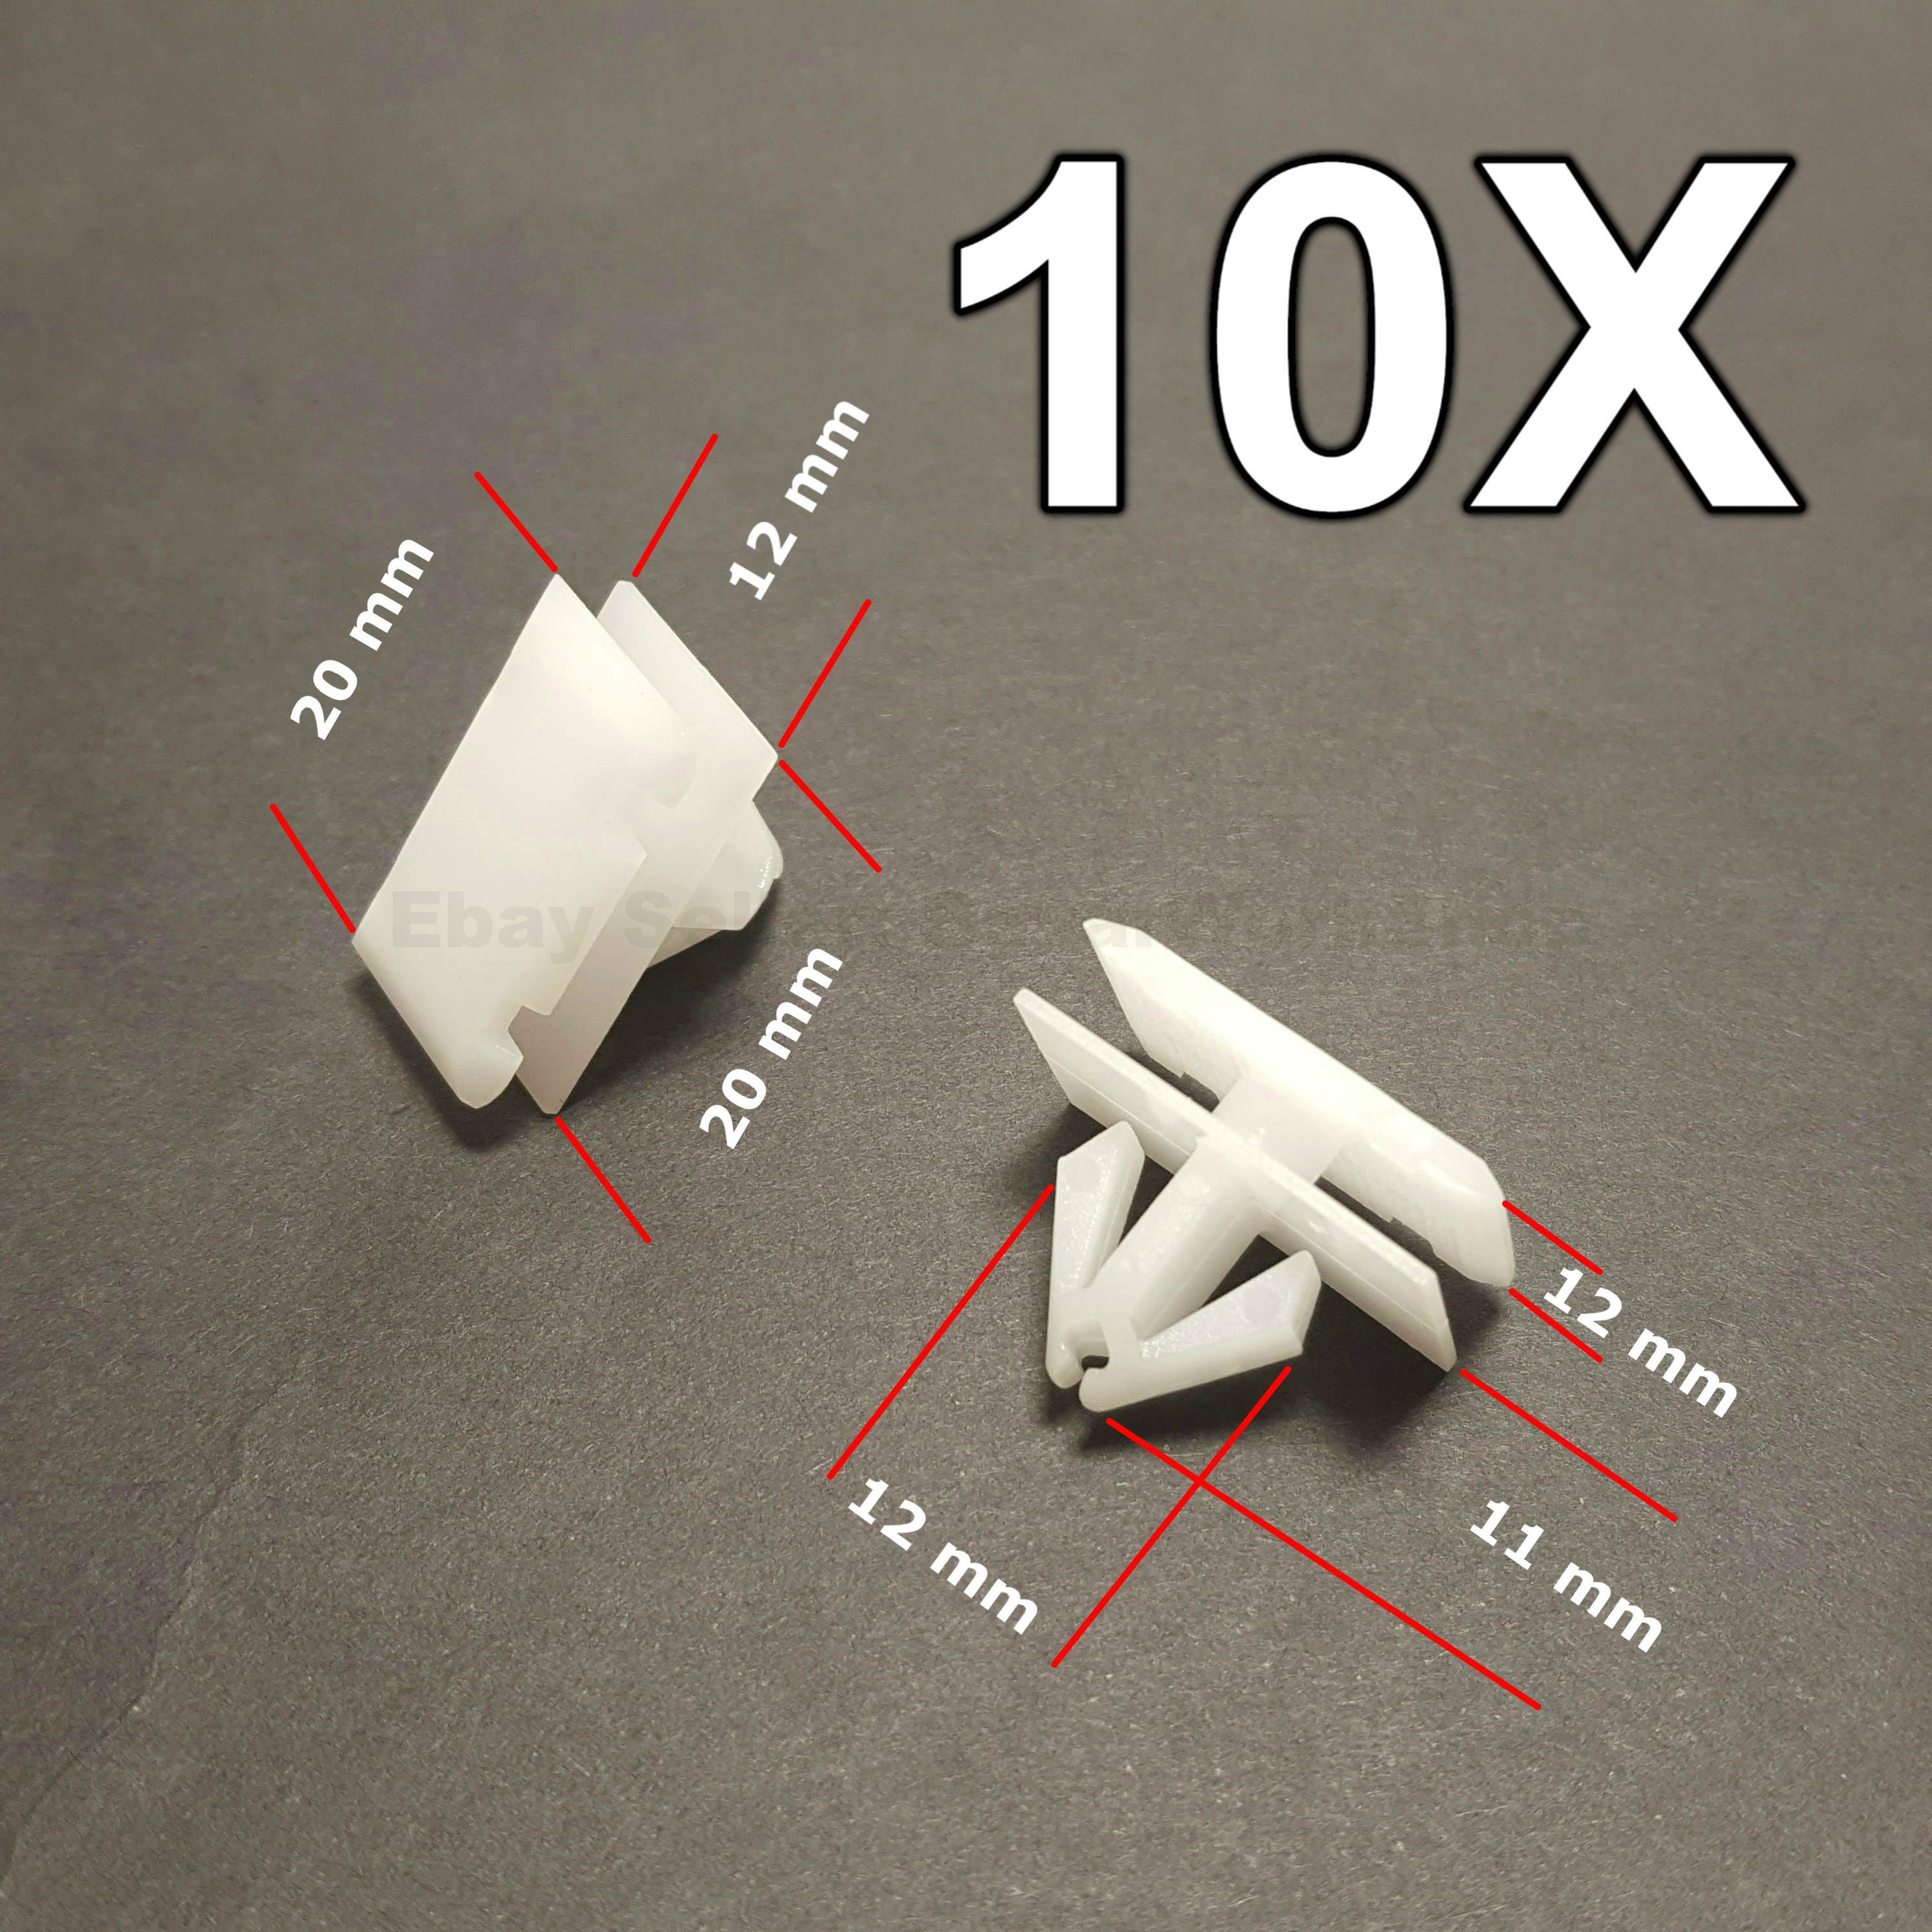 Buick GMC Cadillac Pontiac Chevrolet 10X Door Moulding Clips for GM 